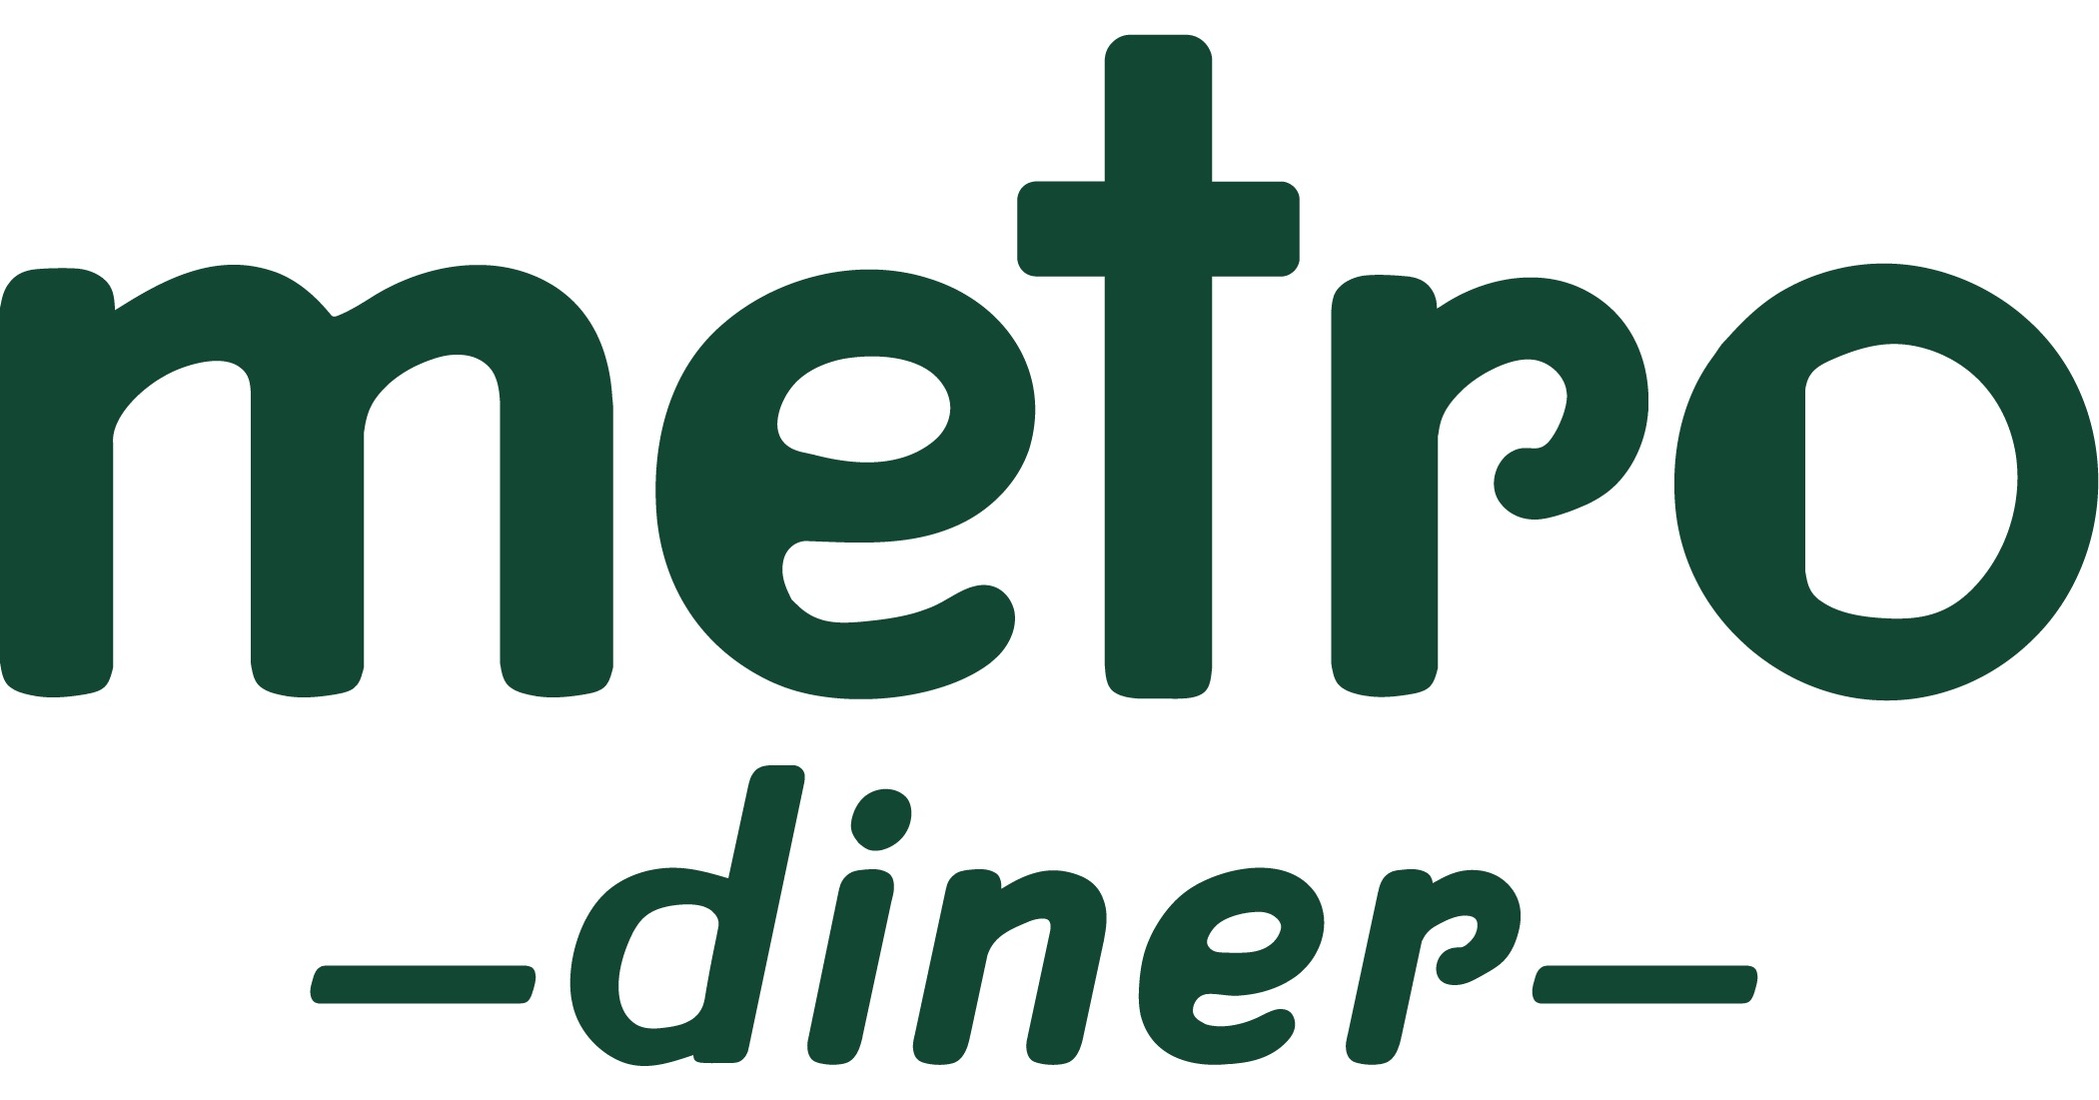 Metro Diner, Dine-in, Takeout, Delivery & Catering